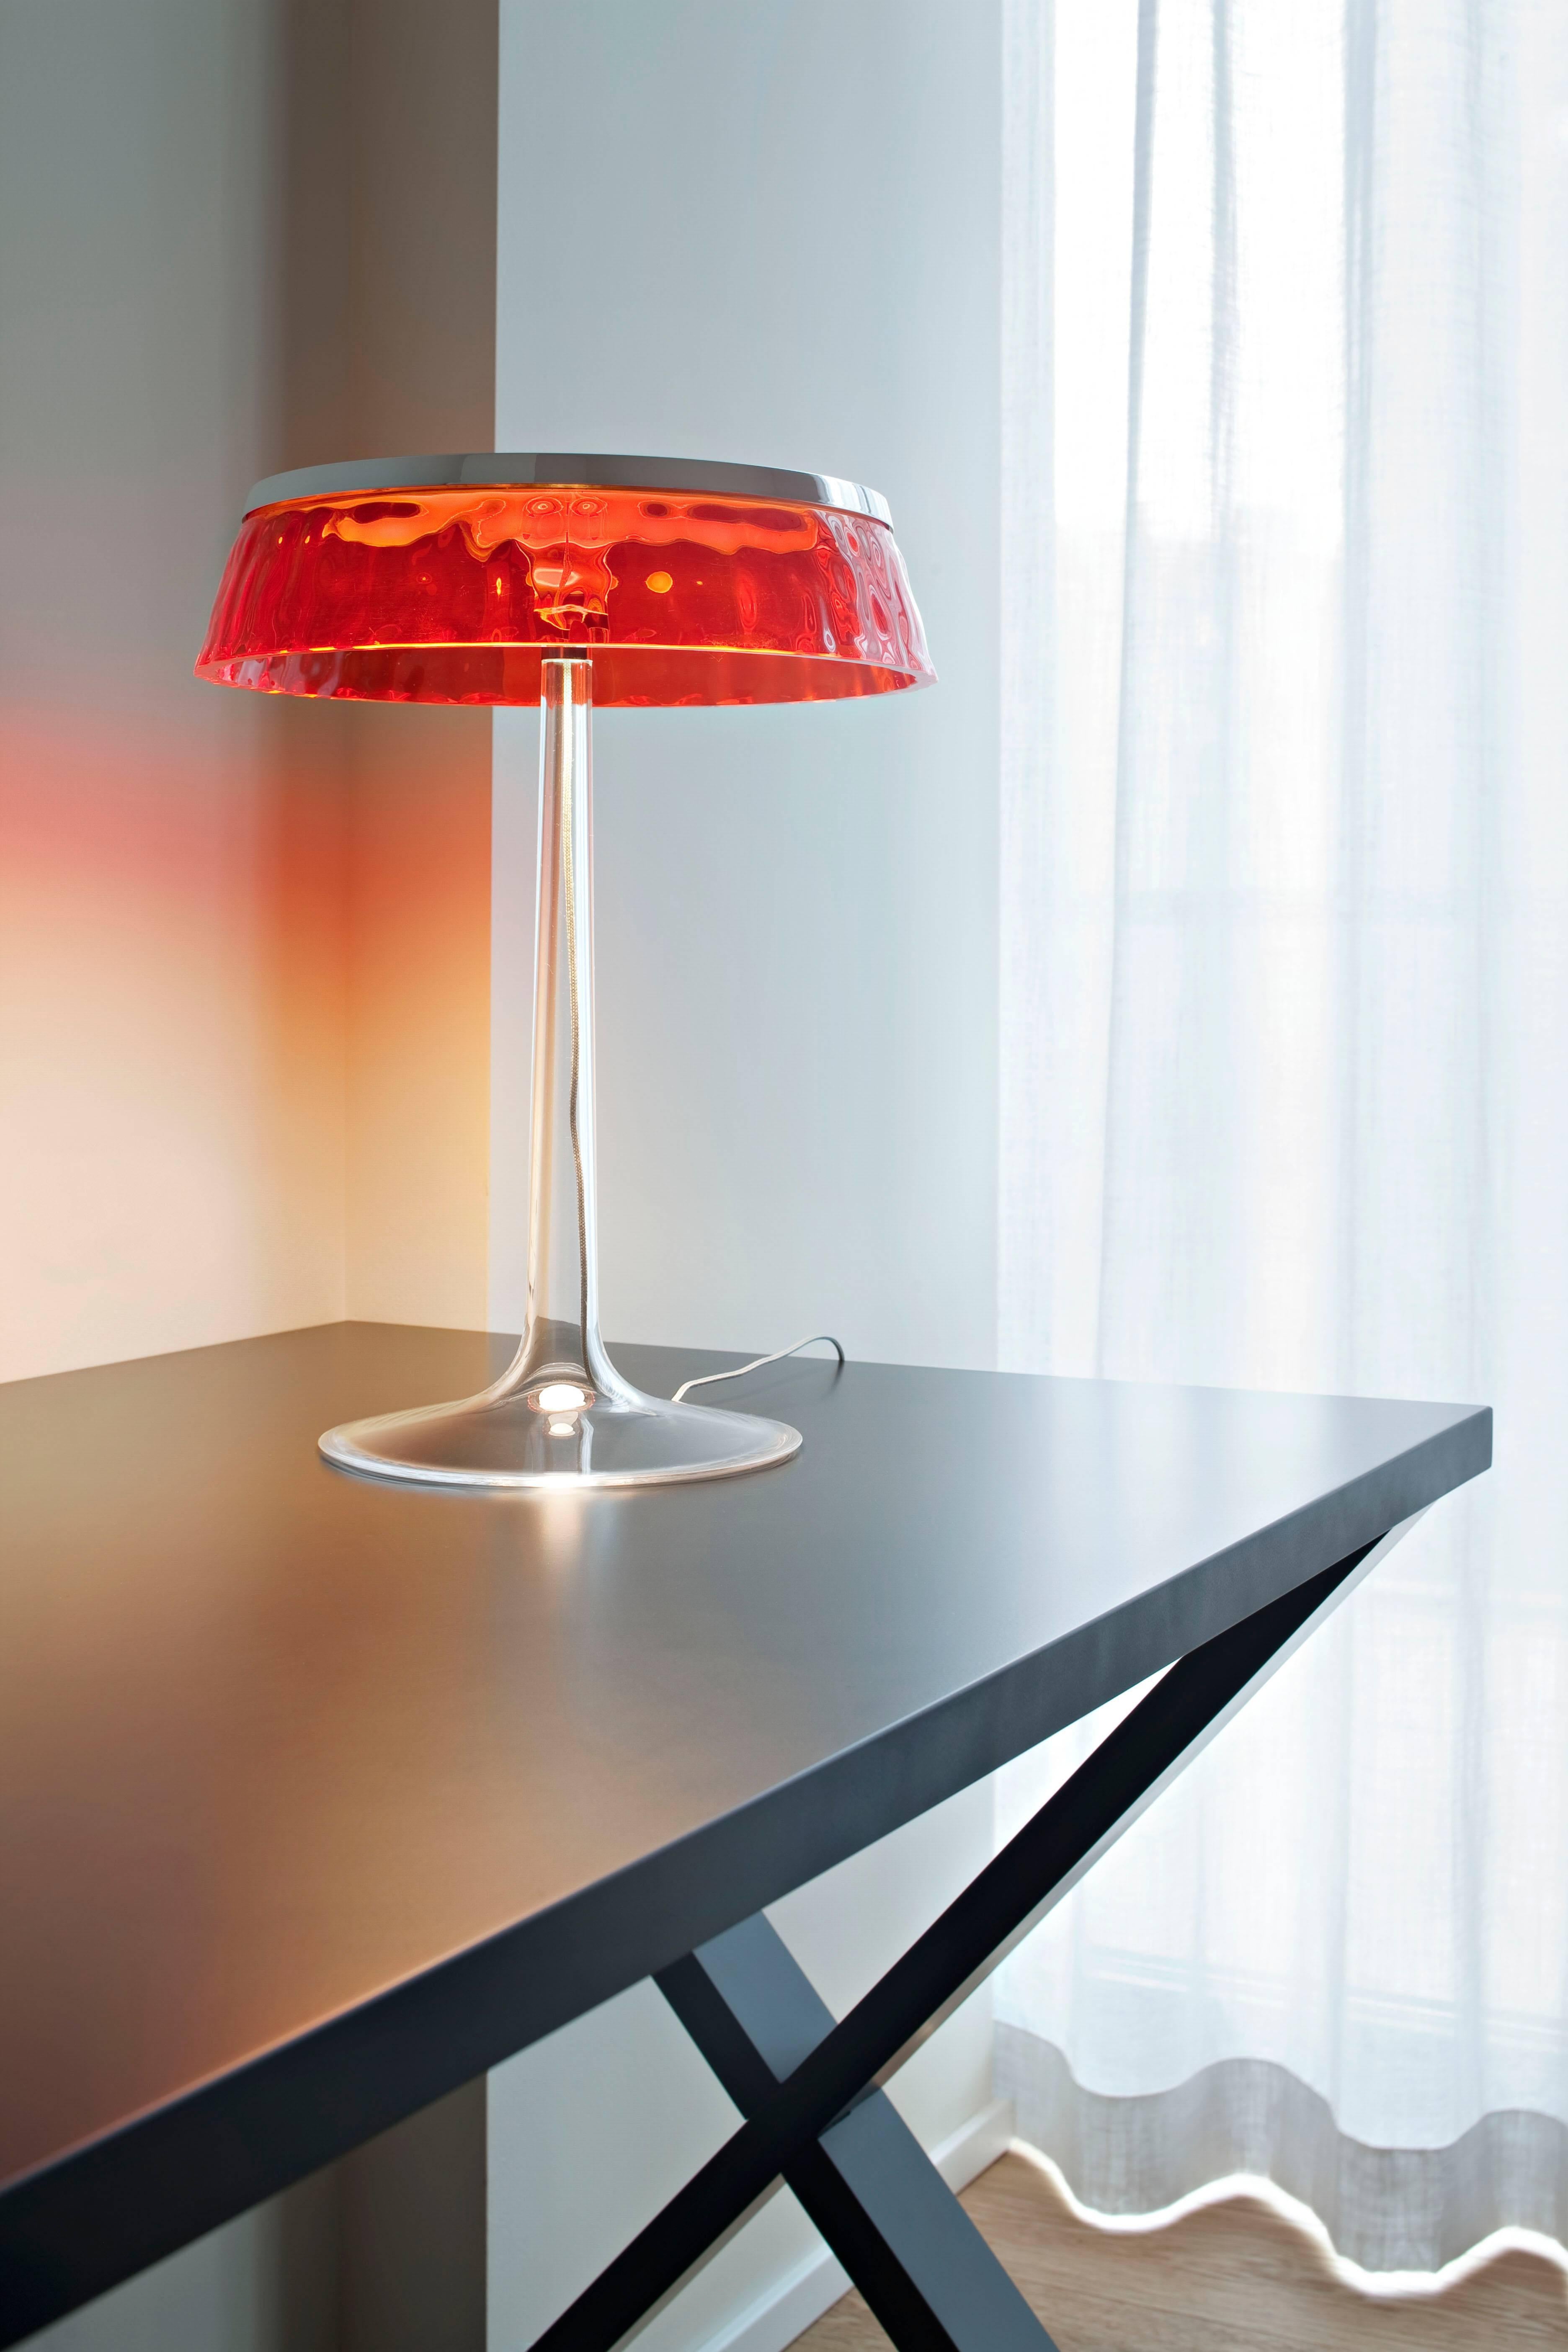 Using revolutionary Edge Lighting Technology, the Bon Jour combines maximum performance and efficiency with visual comfort. Users are able to effortlessly control the intensity of the direct light with just one click.

This sleek and pure light can